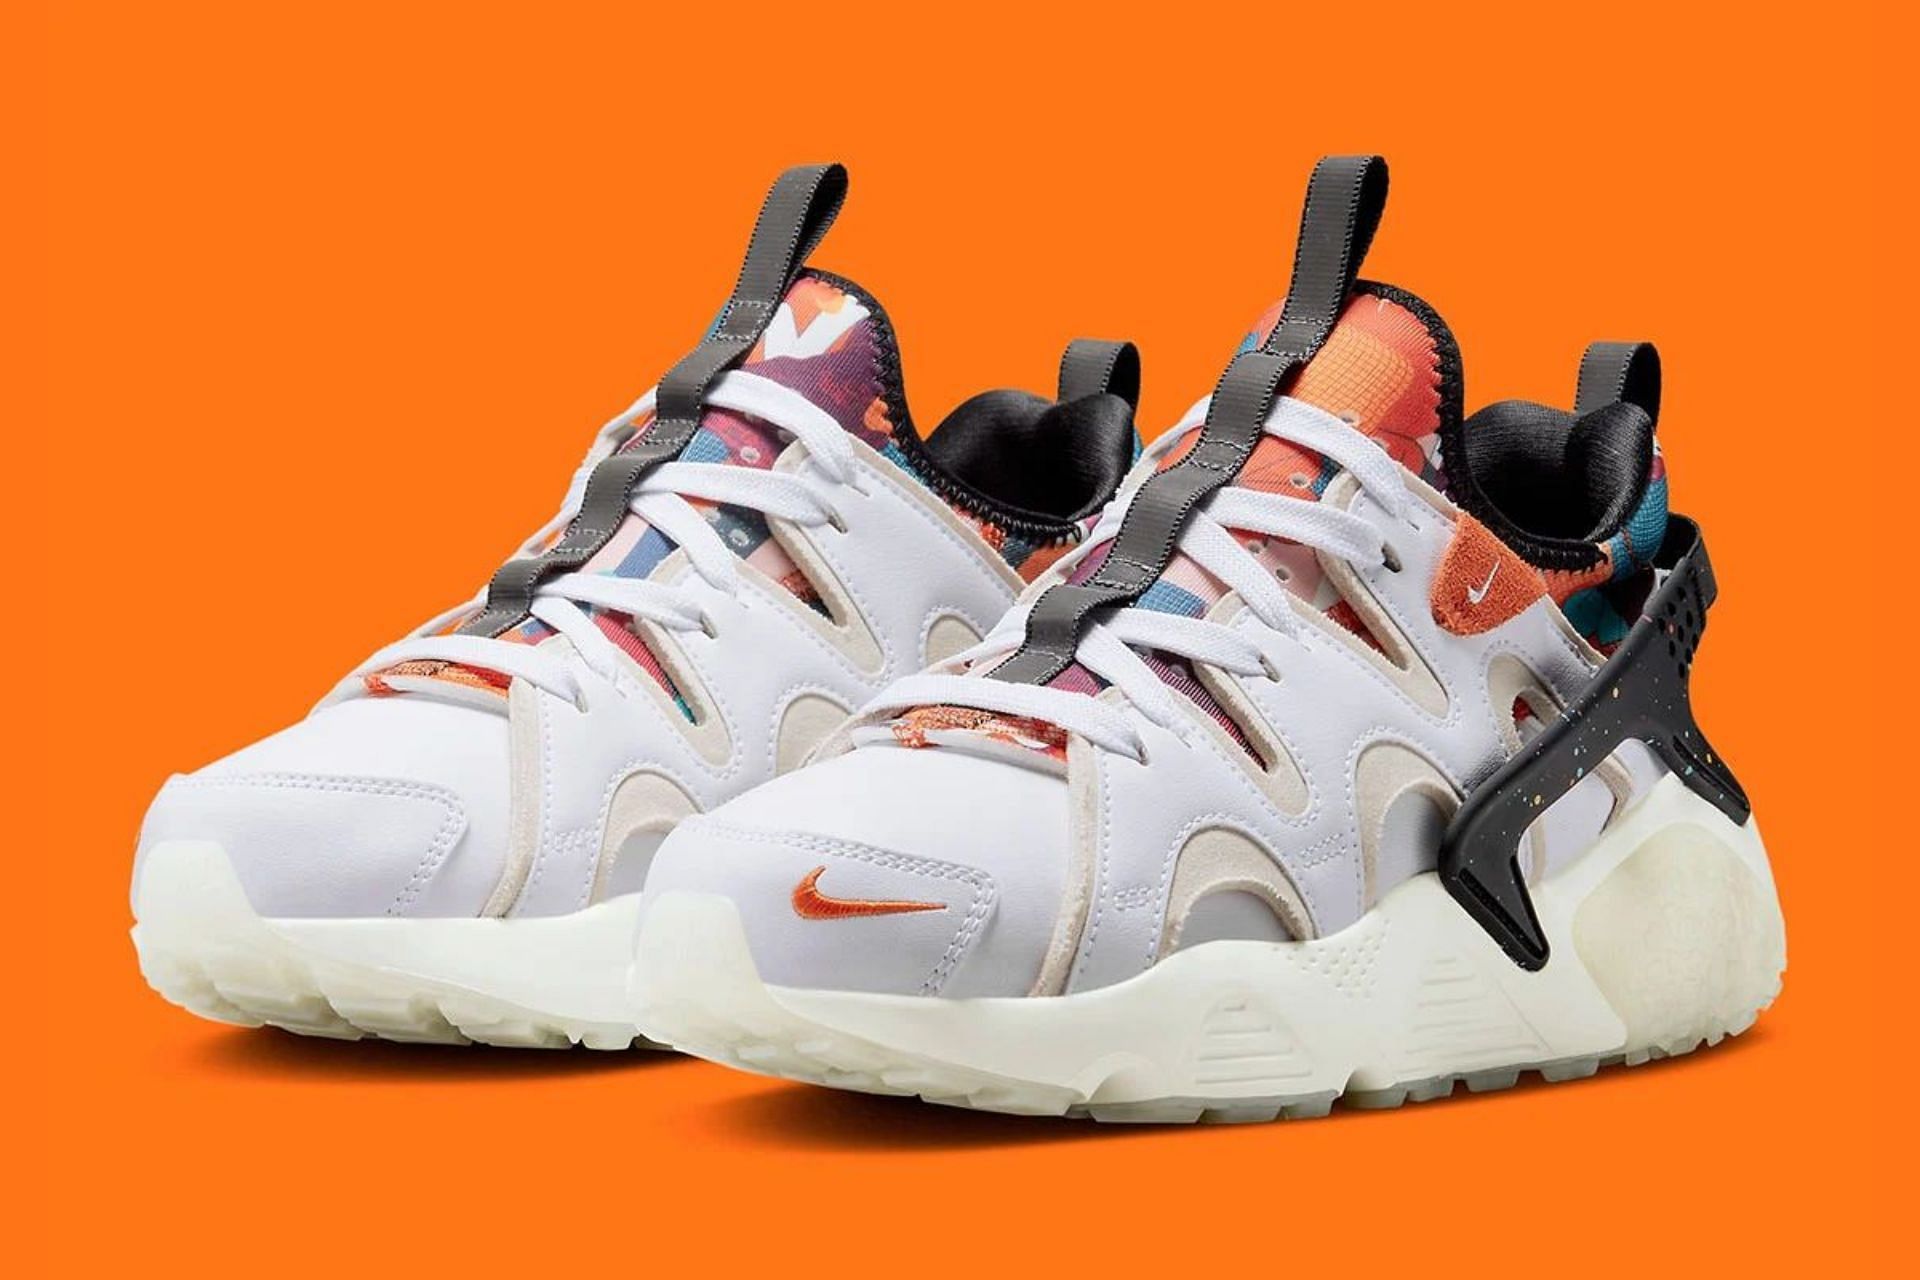 zijde Bouwen Van toepassing Lunar New Year: Where to buy Nike Air Huarache Craft “Lunar New Year” shoes?  Everything we know so far